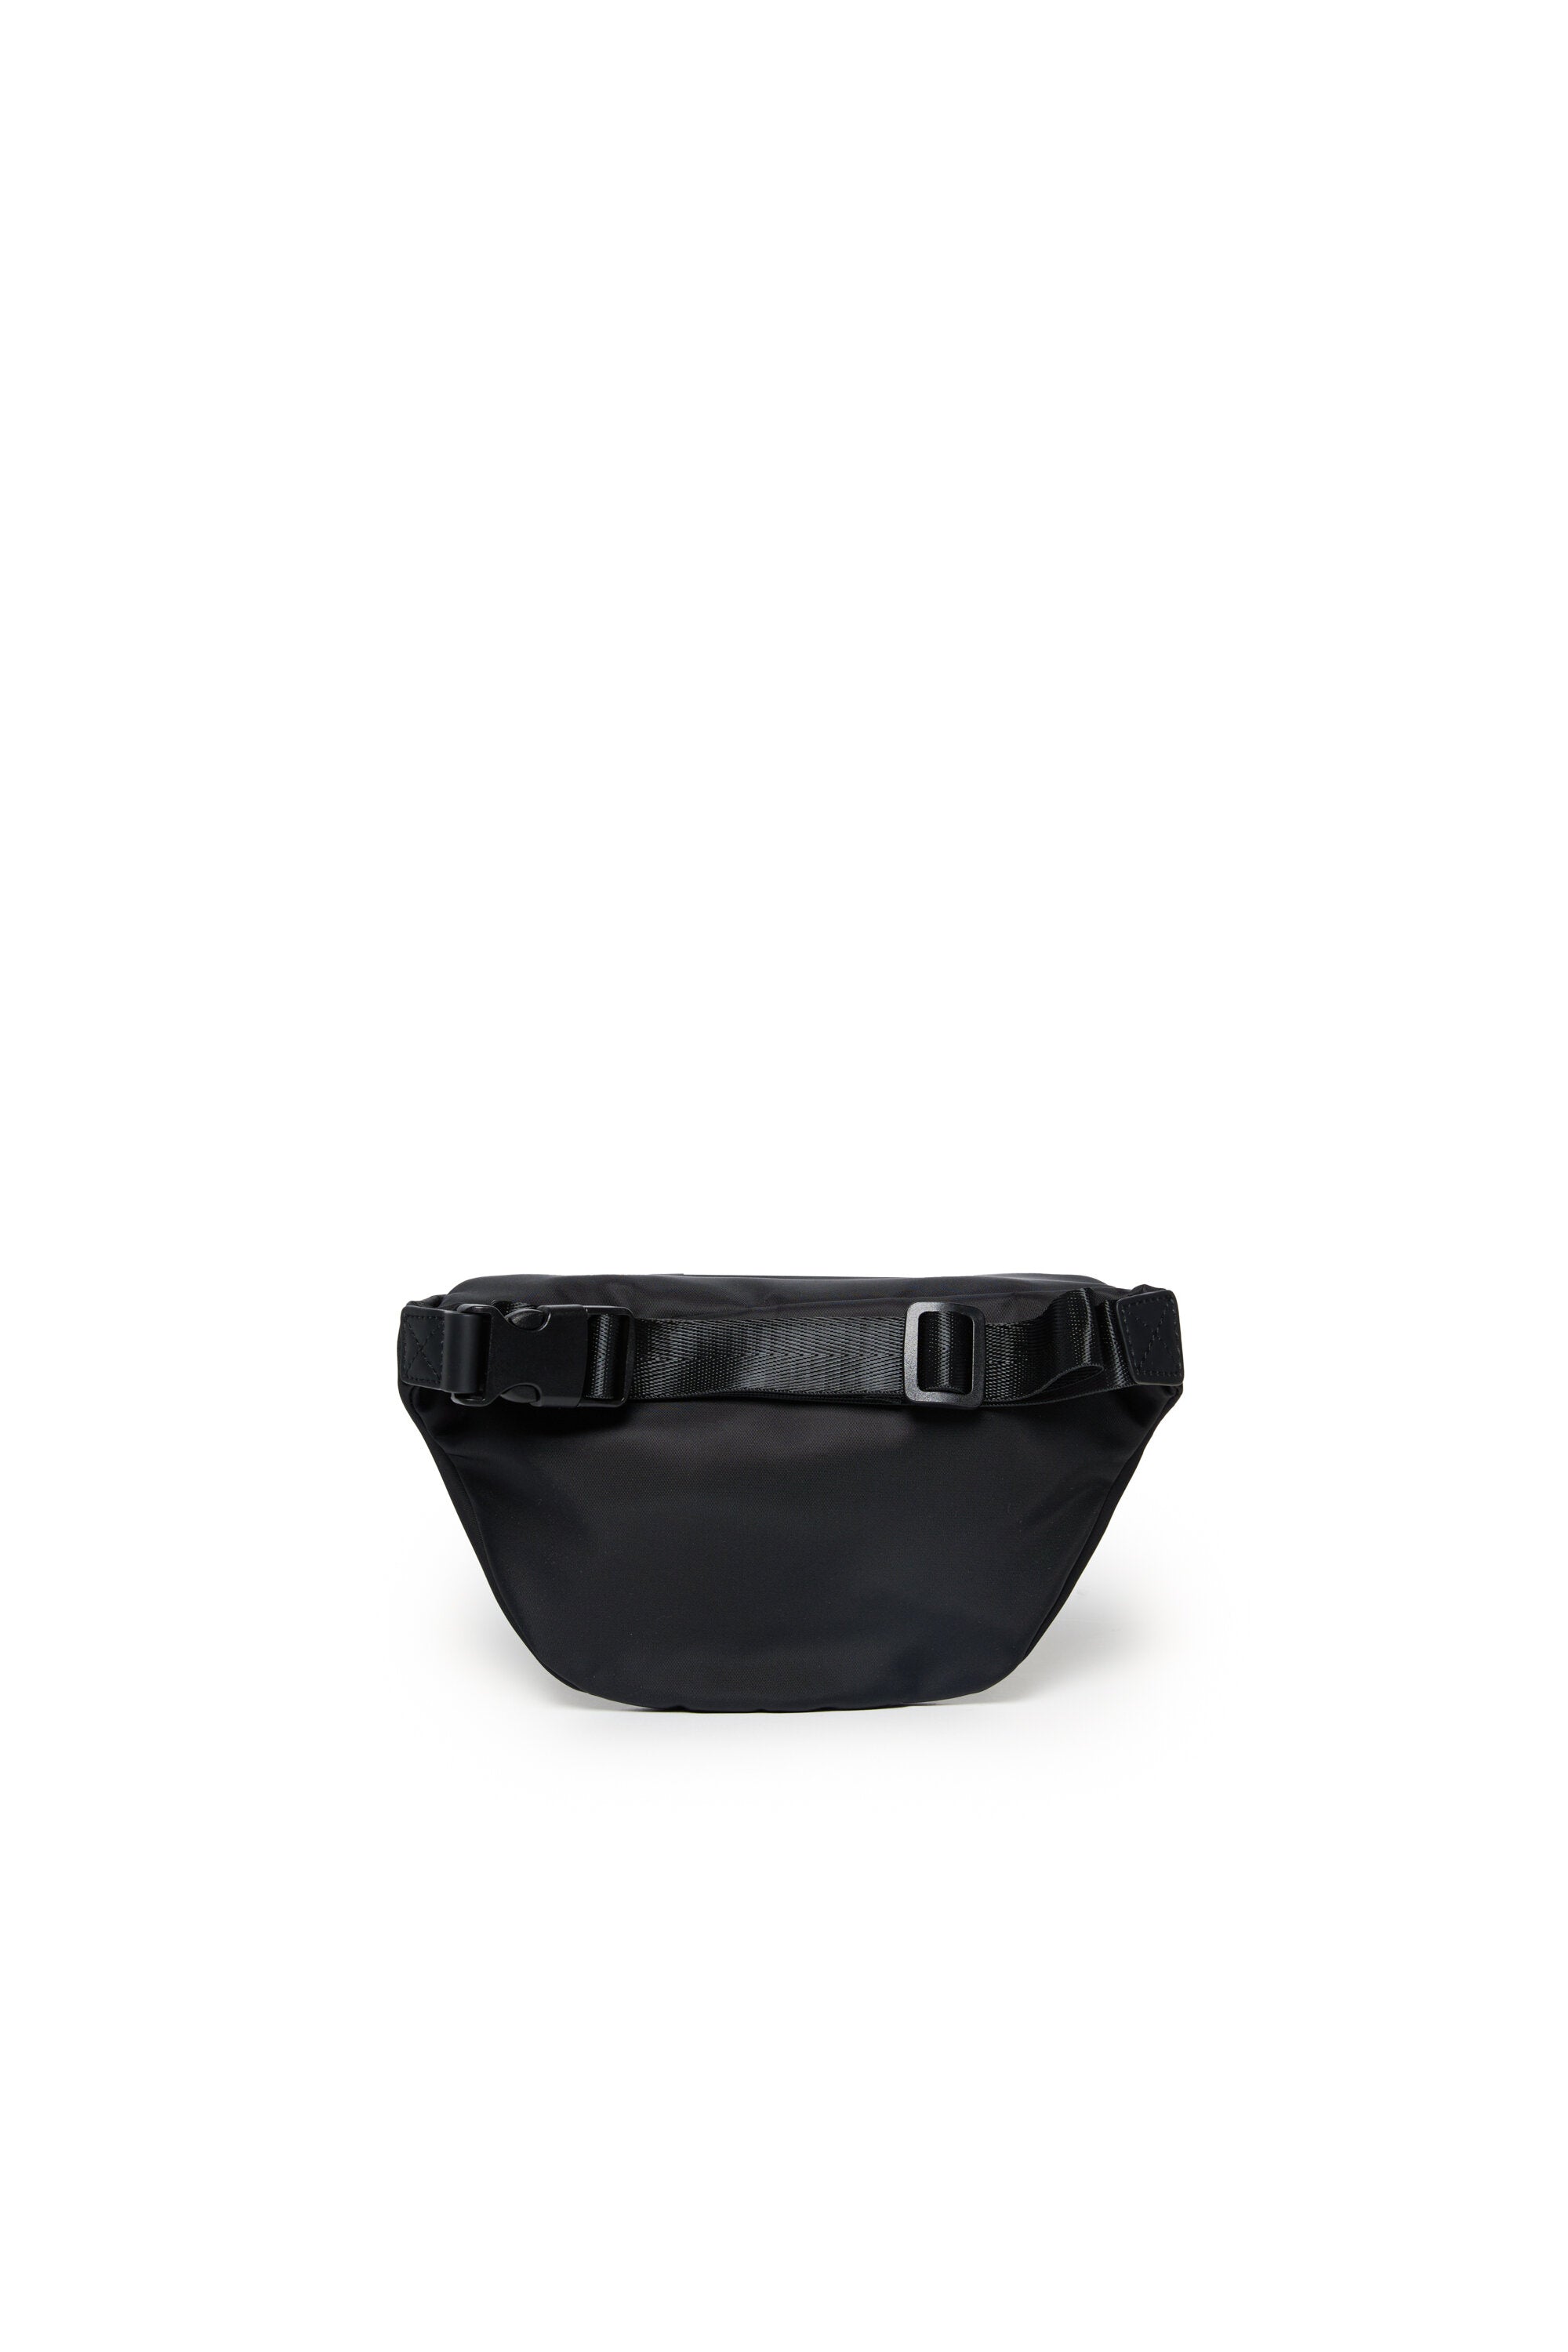 Oval D branded fanny pack